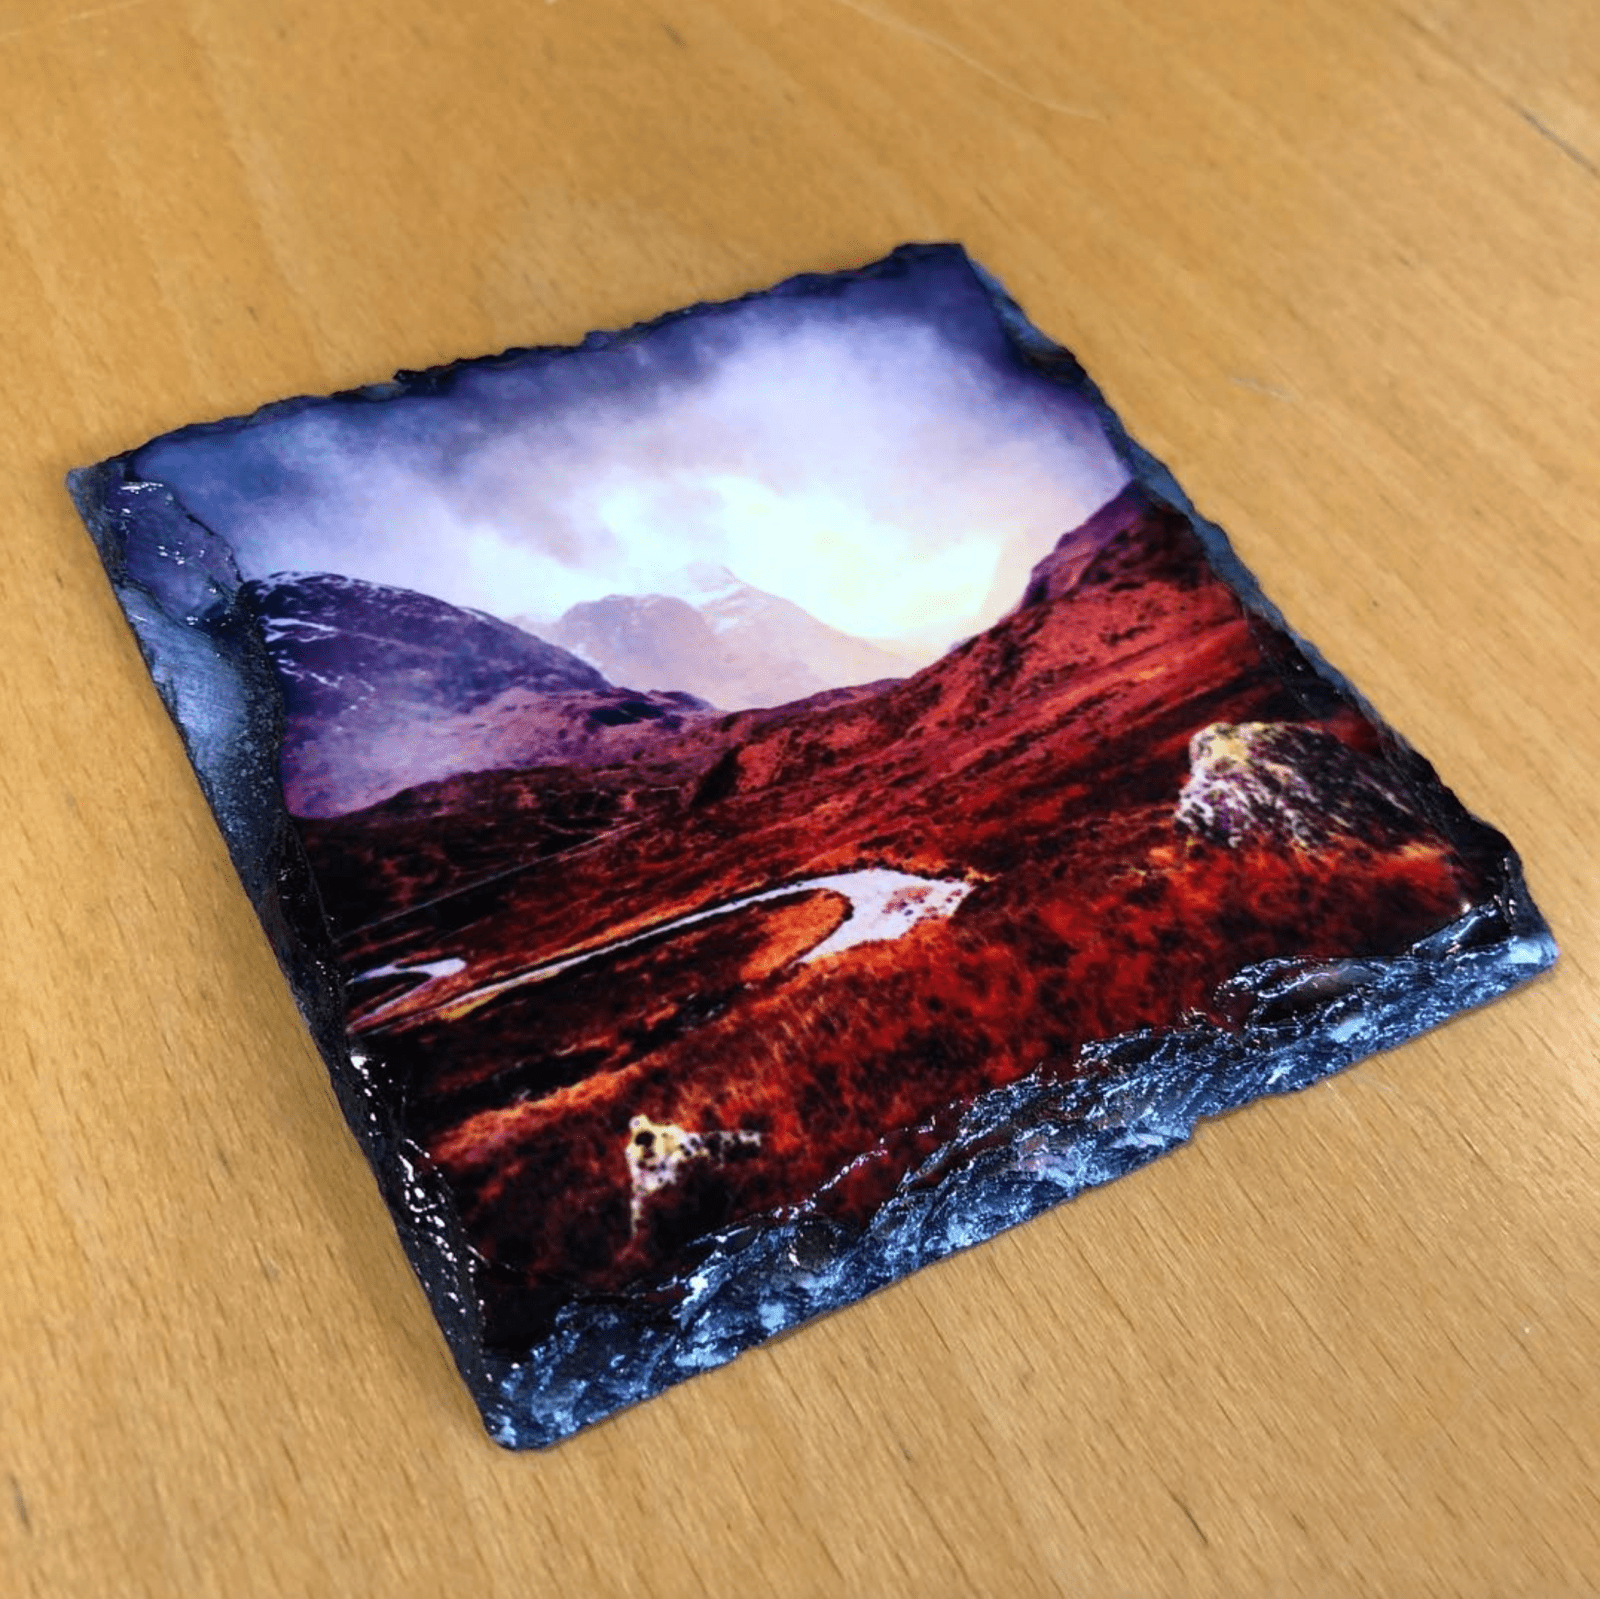 Glencoe Mist Slate Art-Slate Art-Glencoe Art Gallery-Paintings, Prints, Homeware, Art Gifts From Scotland By Scottish Artist Kevin Hunter